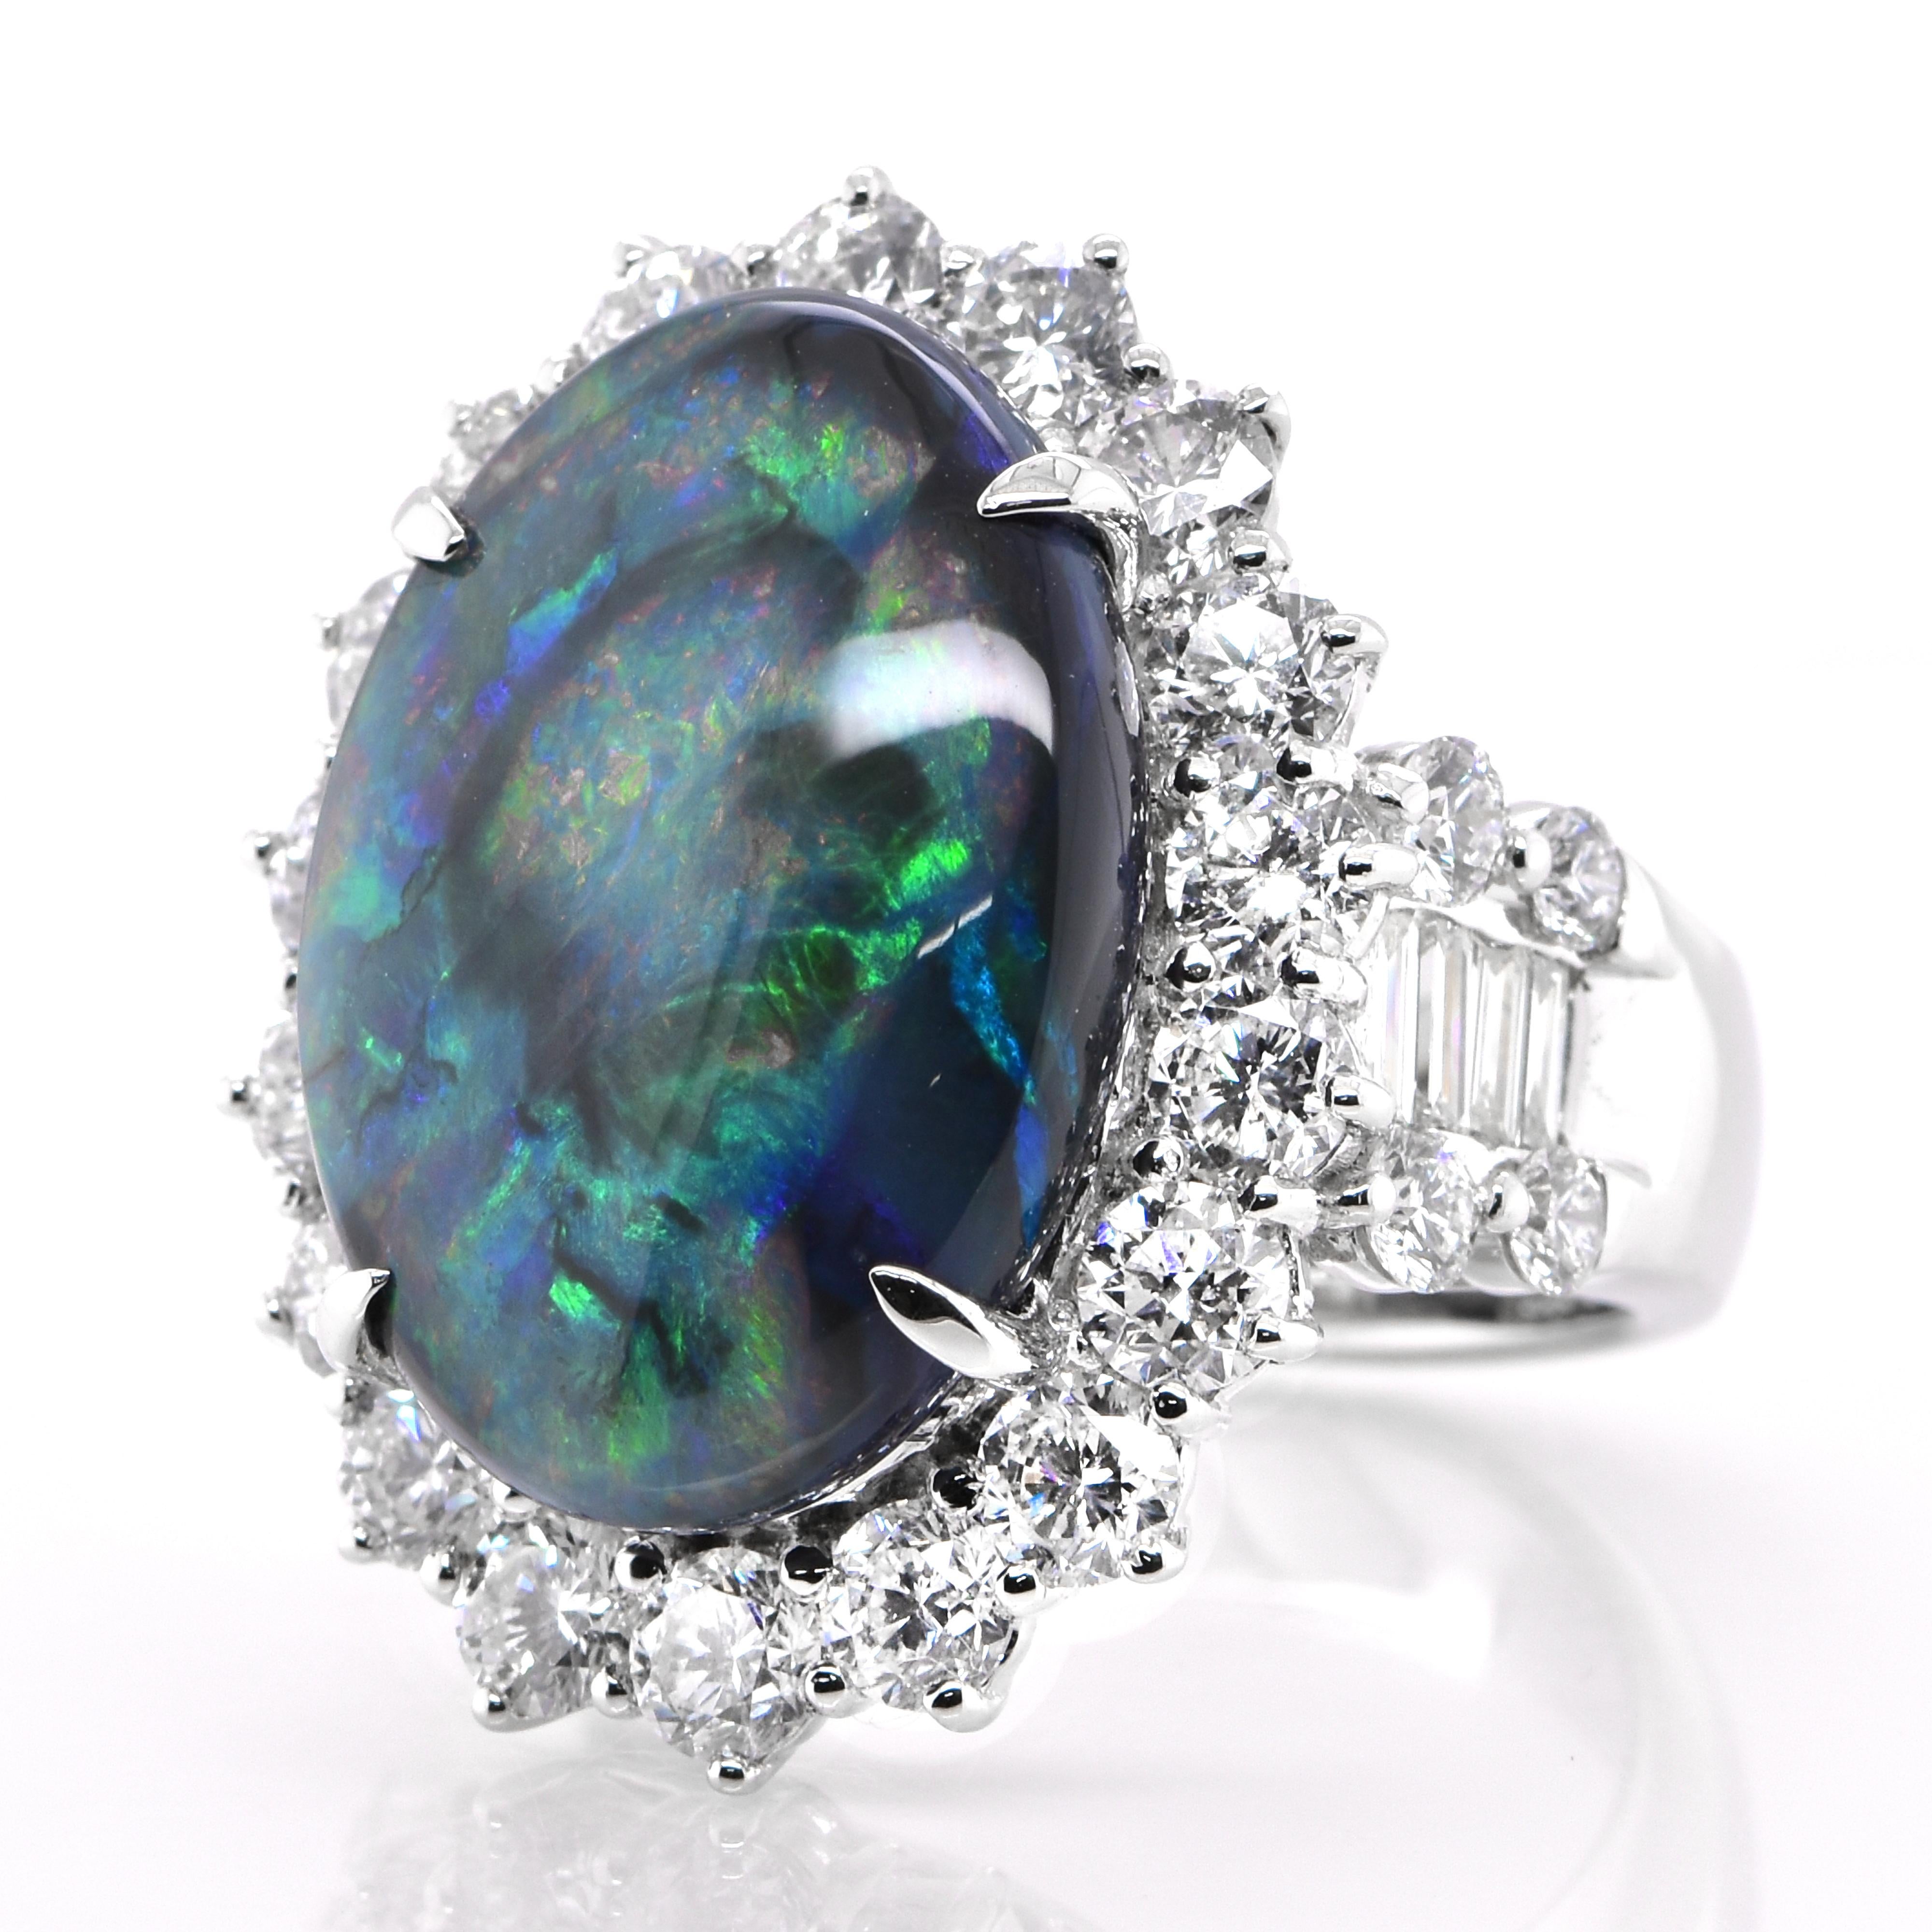 A beautiful ring featuring a 12.13 Carat, Natural, Australian Black Opal and 4.23 Carats of Diamond Accents set in Platinum. The Opal displays very good play of color! Opals are known for exhibiting flashes of rainbow colors known as 